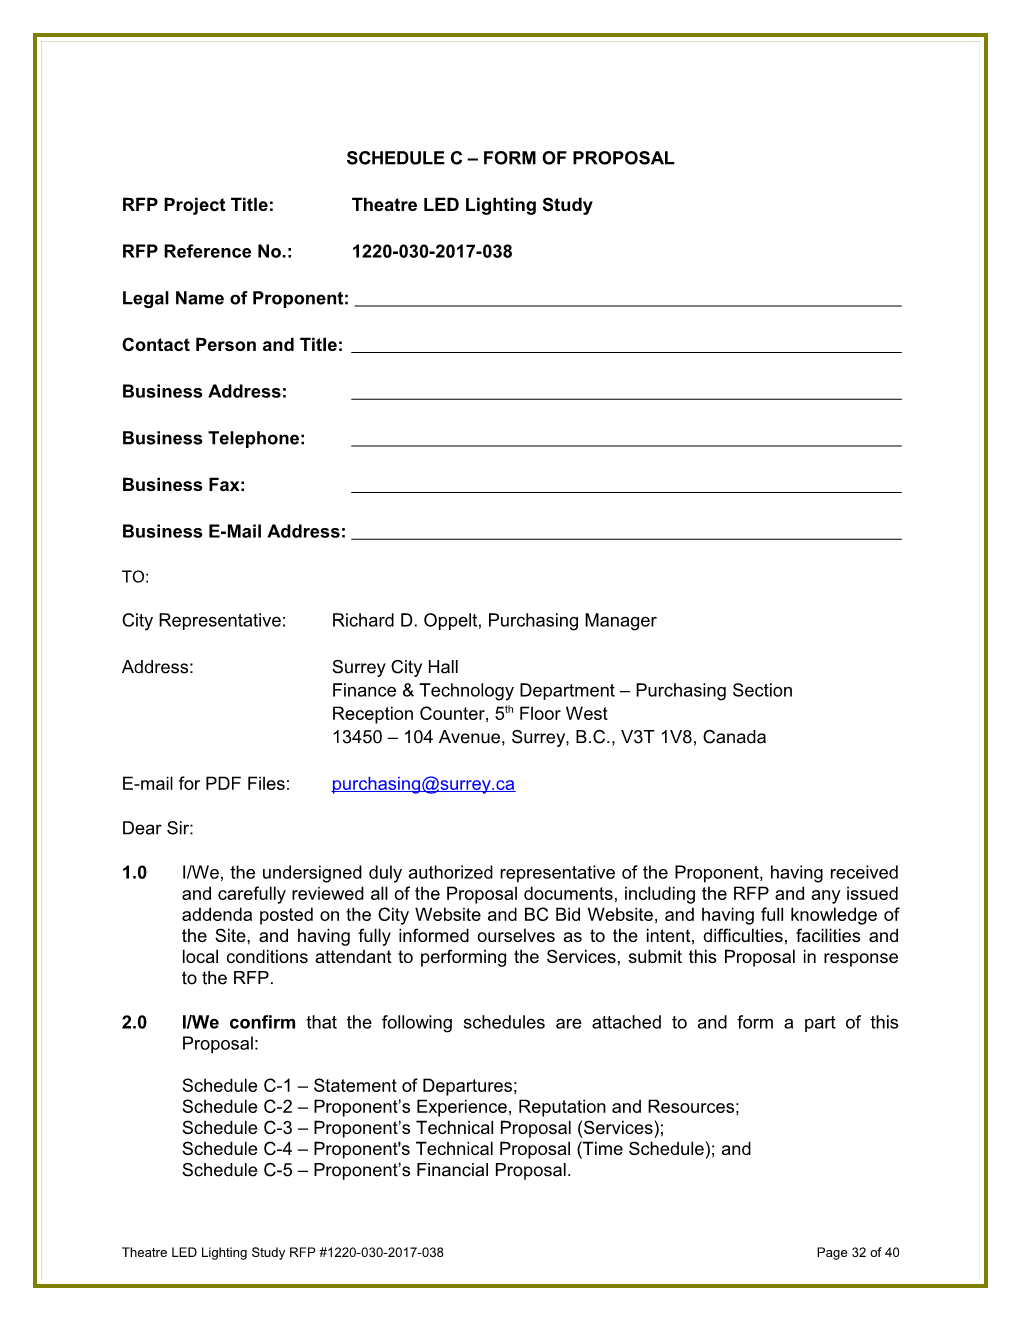 RFP Project Title:Theatre LED Lighting Study